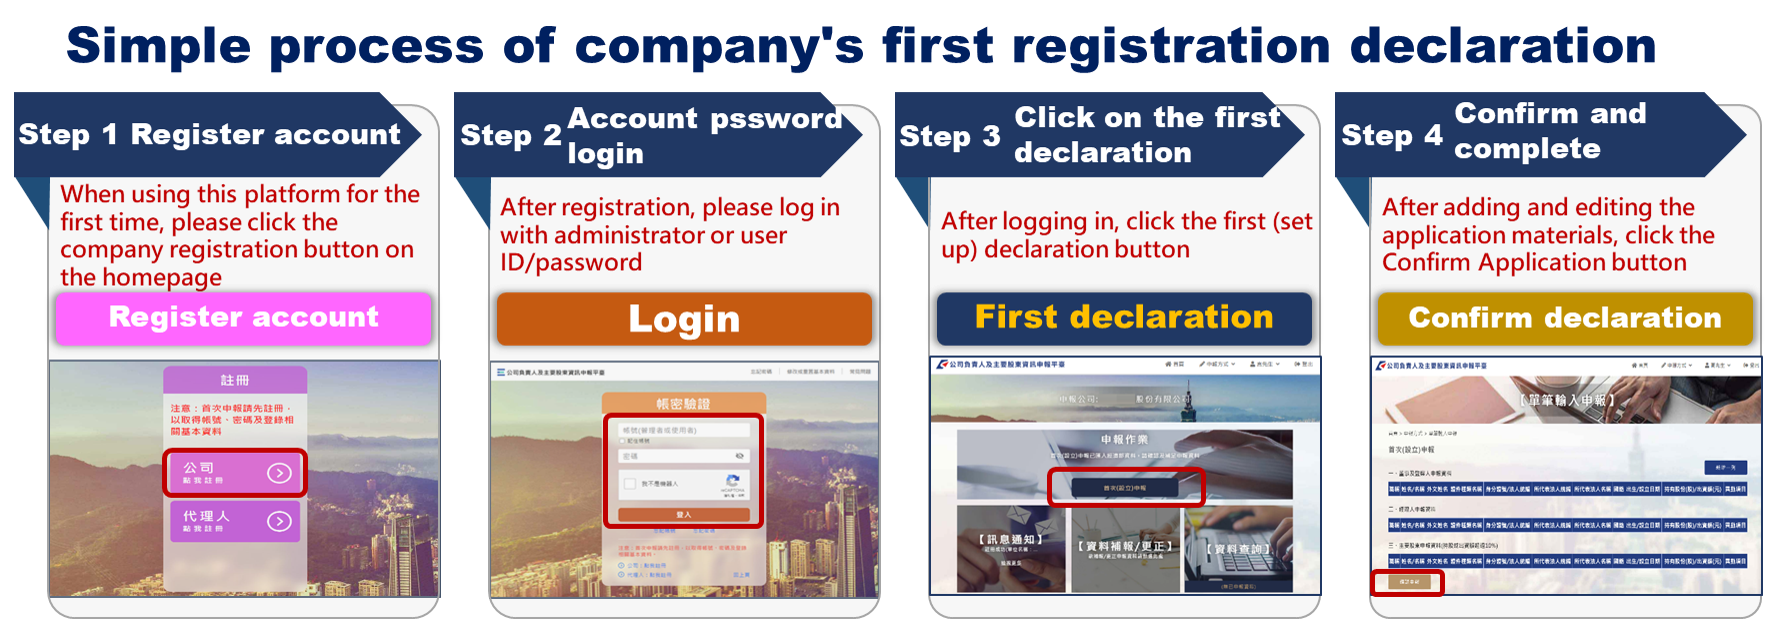  Simple process of declaration company's first registration declaration